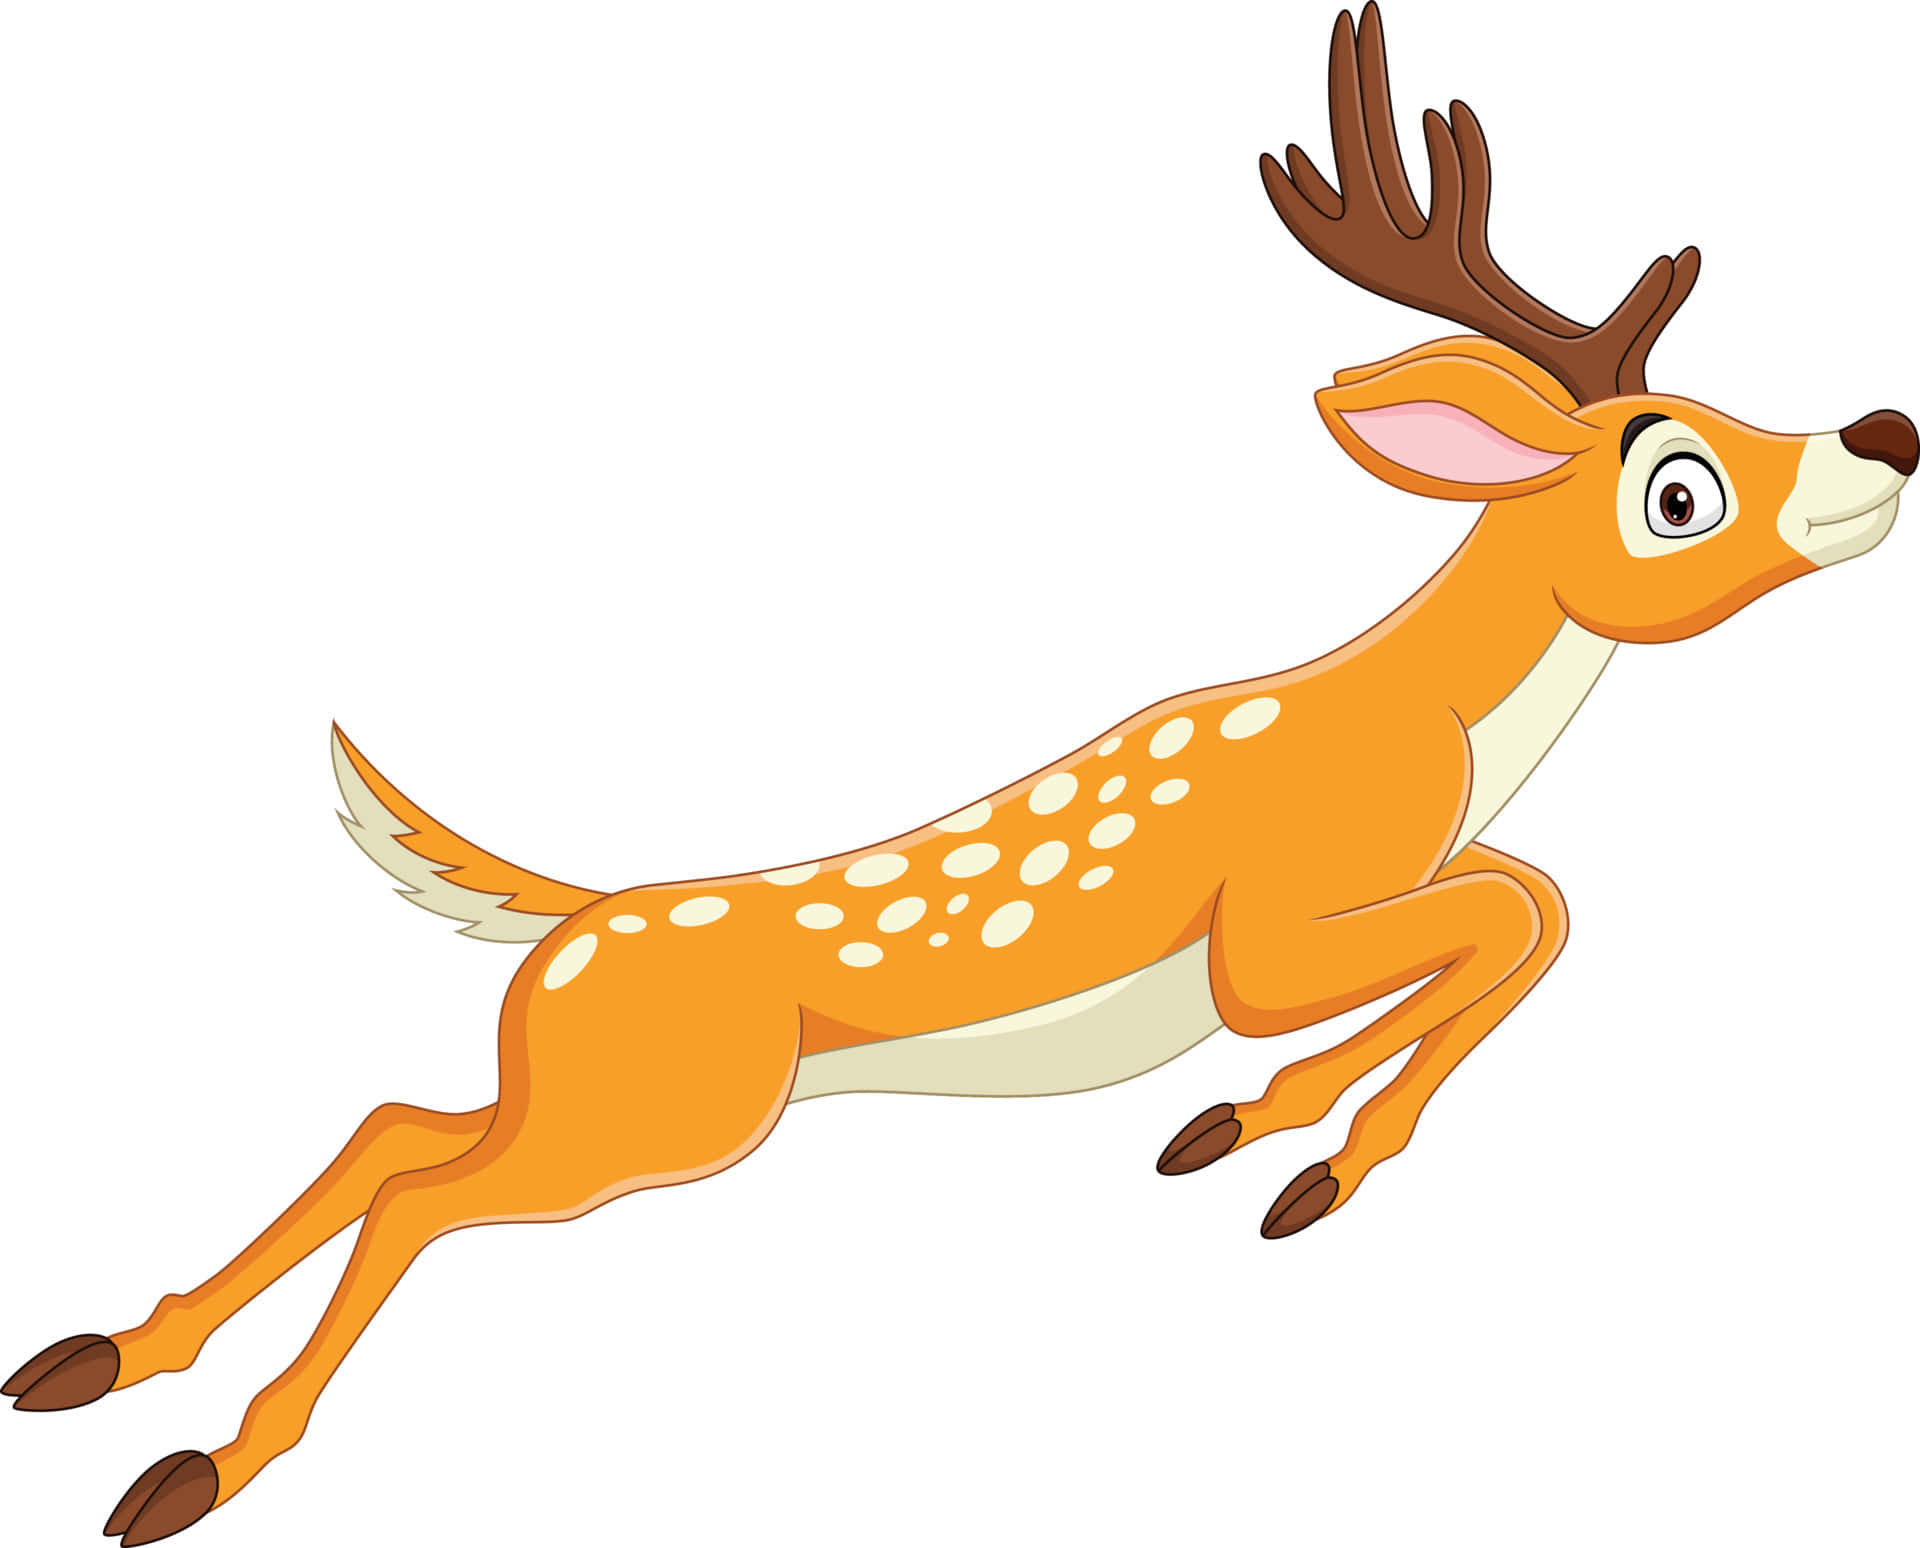 Jumping Cartoon Funny Deer Picture